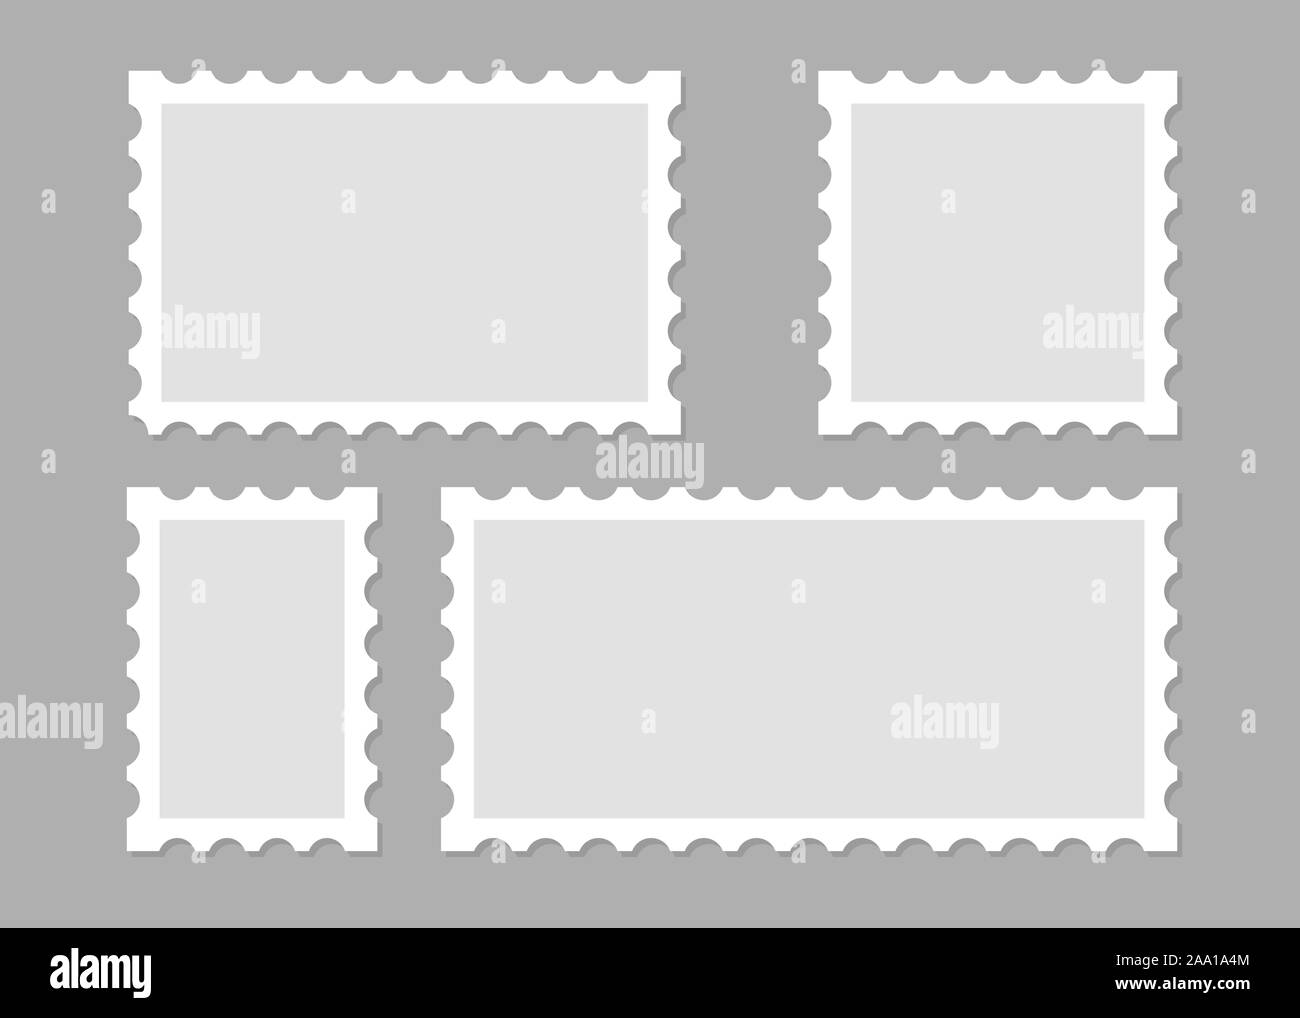 Illustration with blank postage stamps. Isolated vector design. Perforated edge label. Label, sticker vector illustration Stock Vector